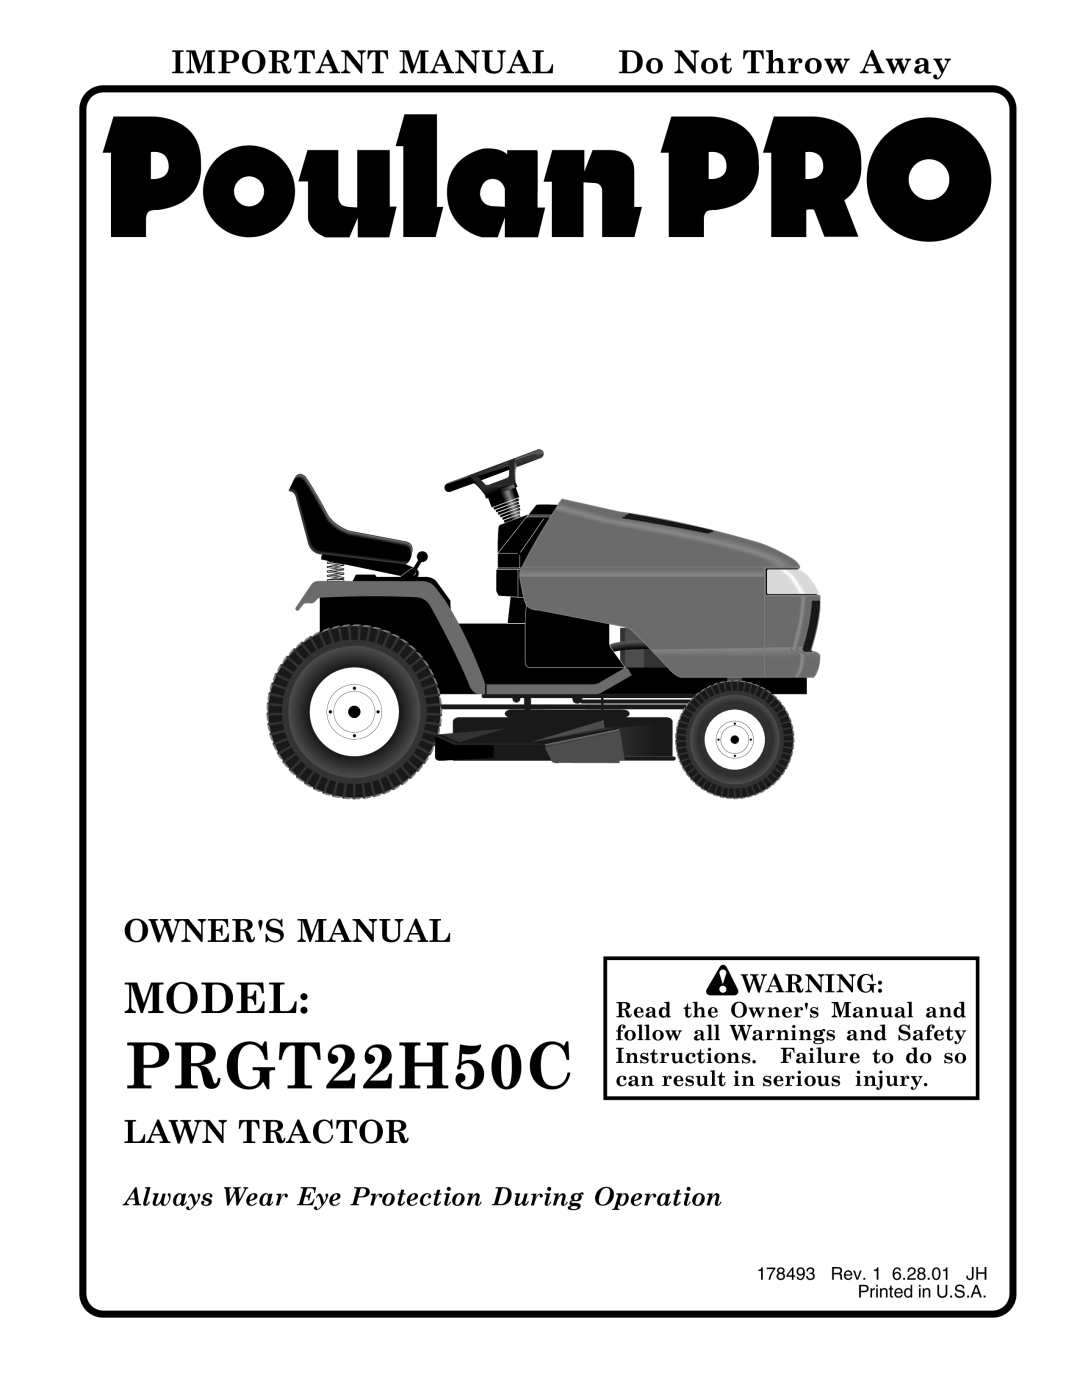 Poulan PRGT22H50C owner manual Model, IMPORTANT MANUAL Do Not Throw Away, Owners Manual, Lawn Tractor 